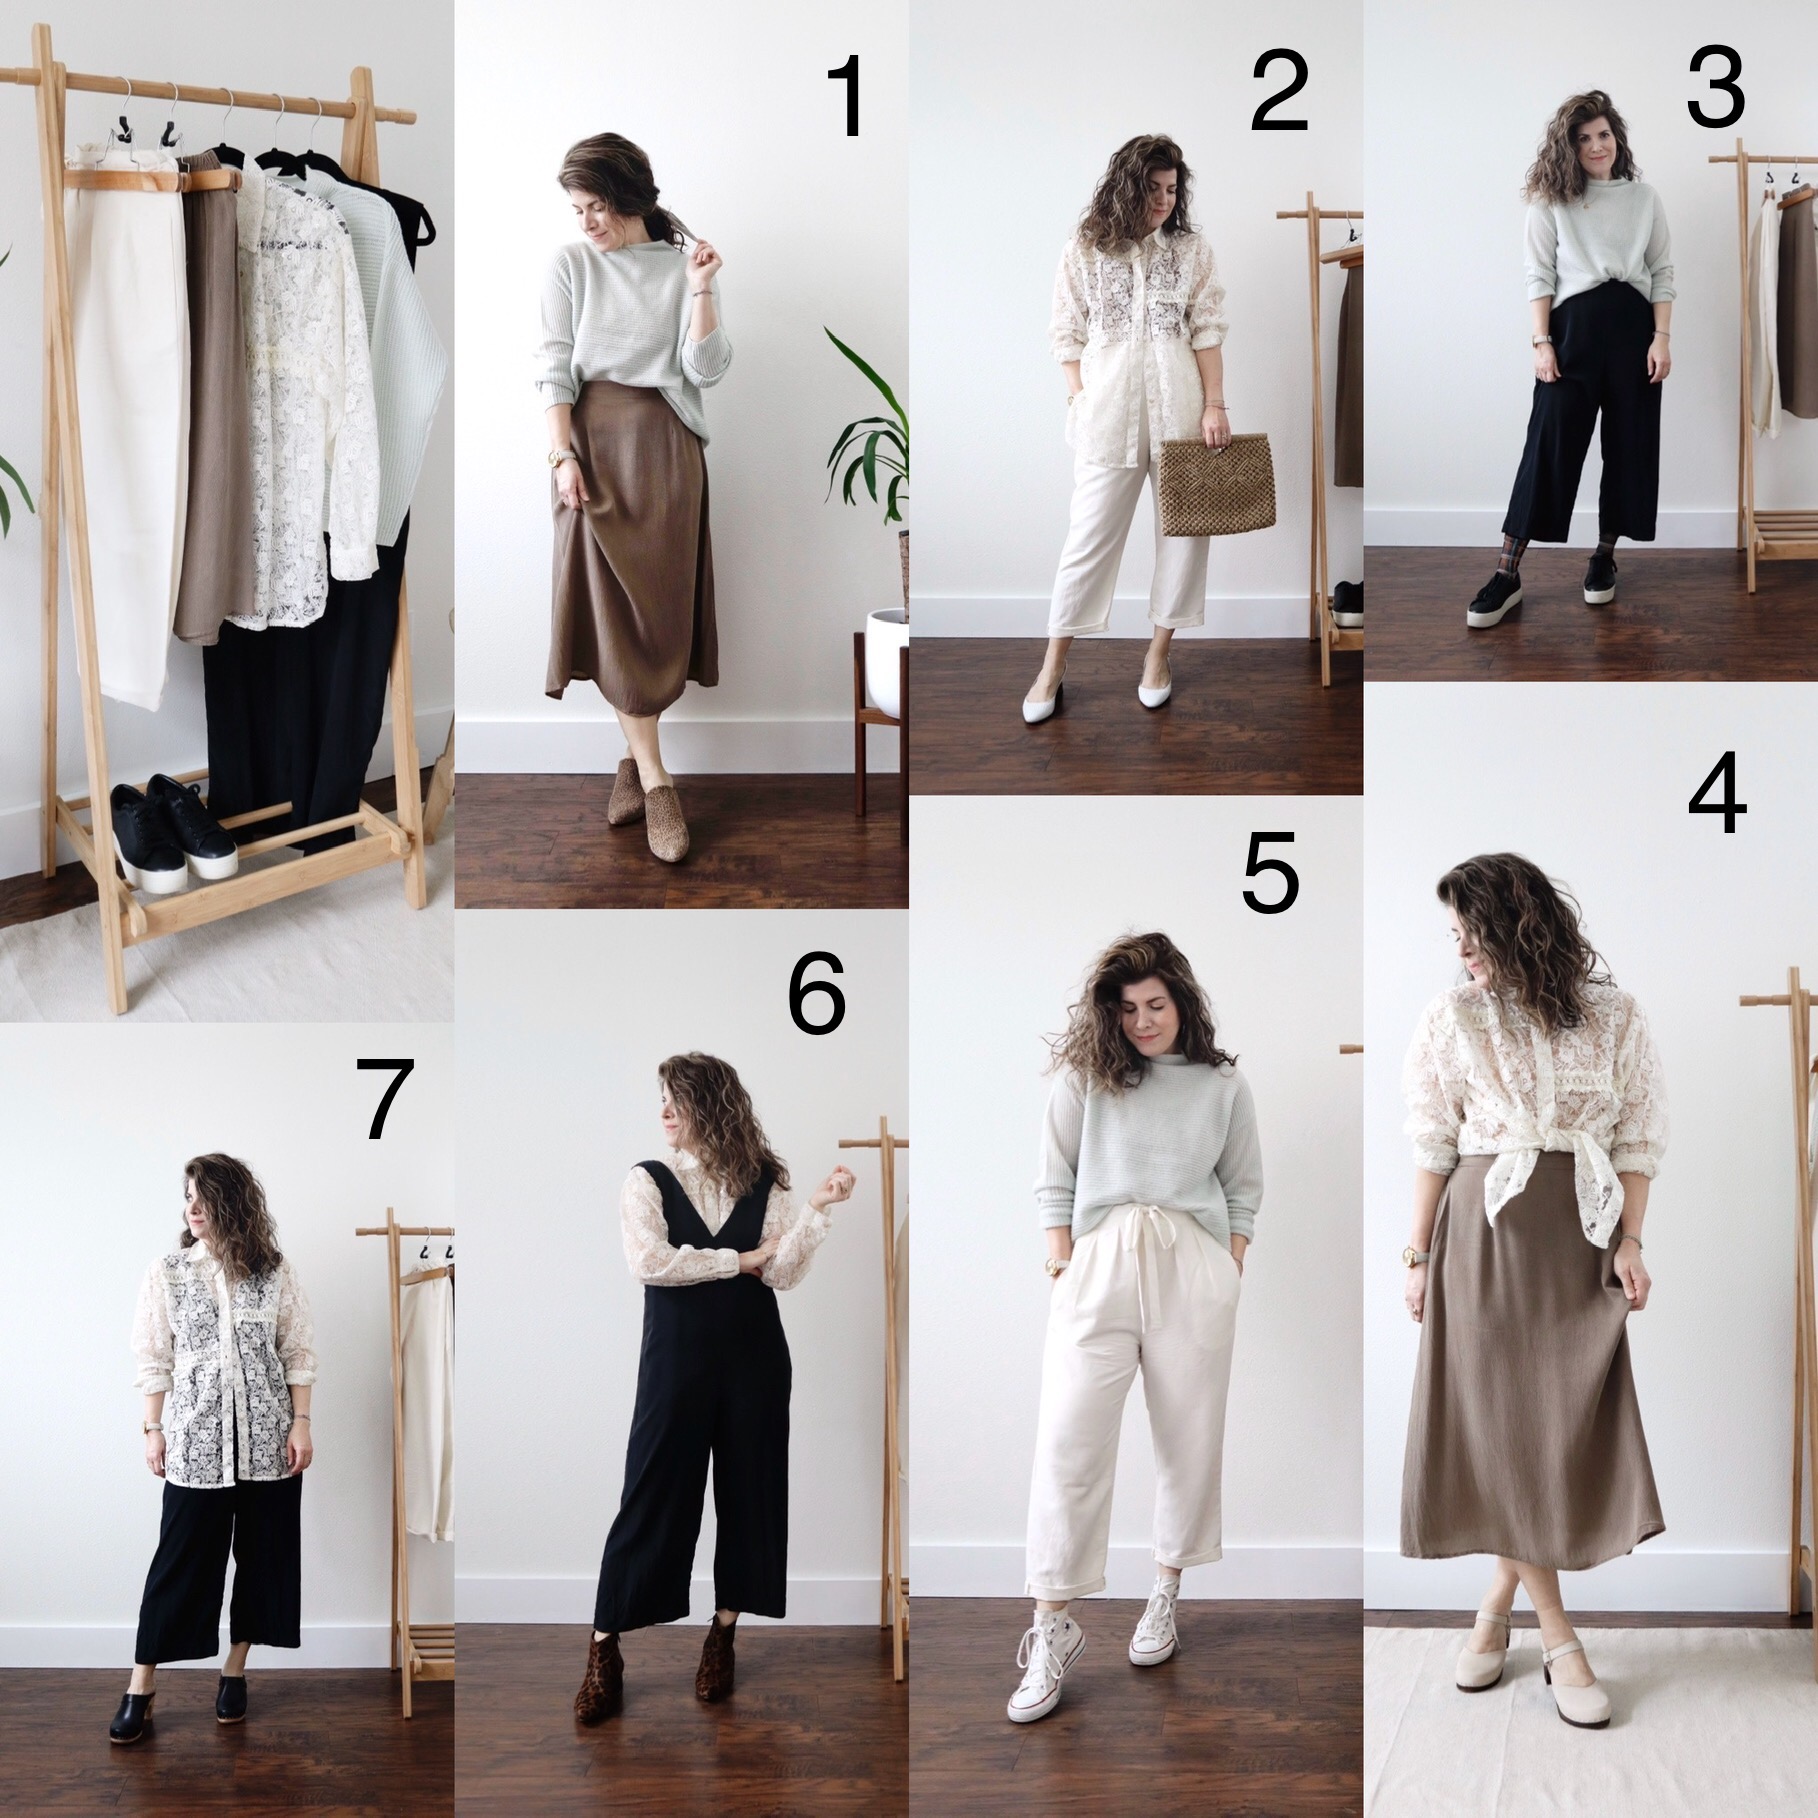 You are currently viewing Mini Capsule Wardrobe – “Capsule by 5”